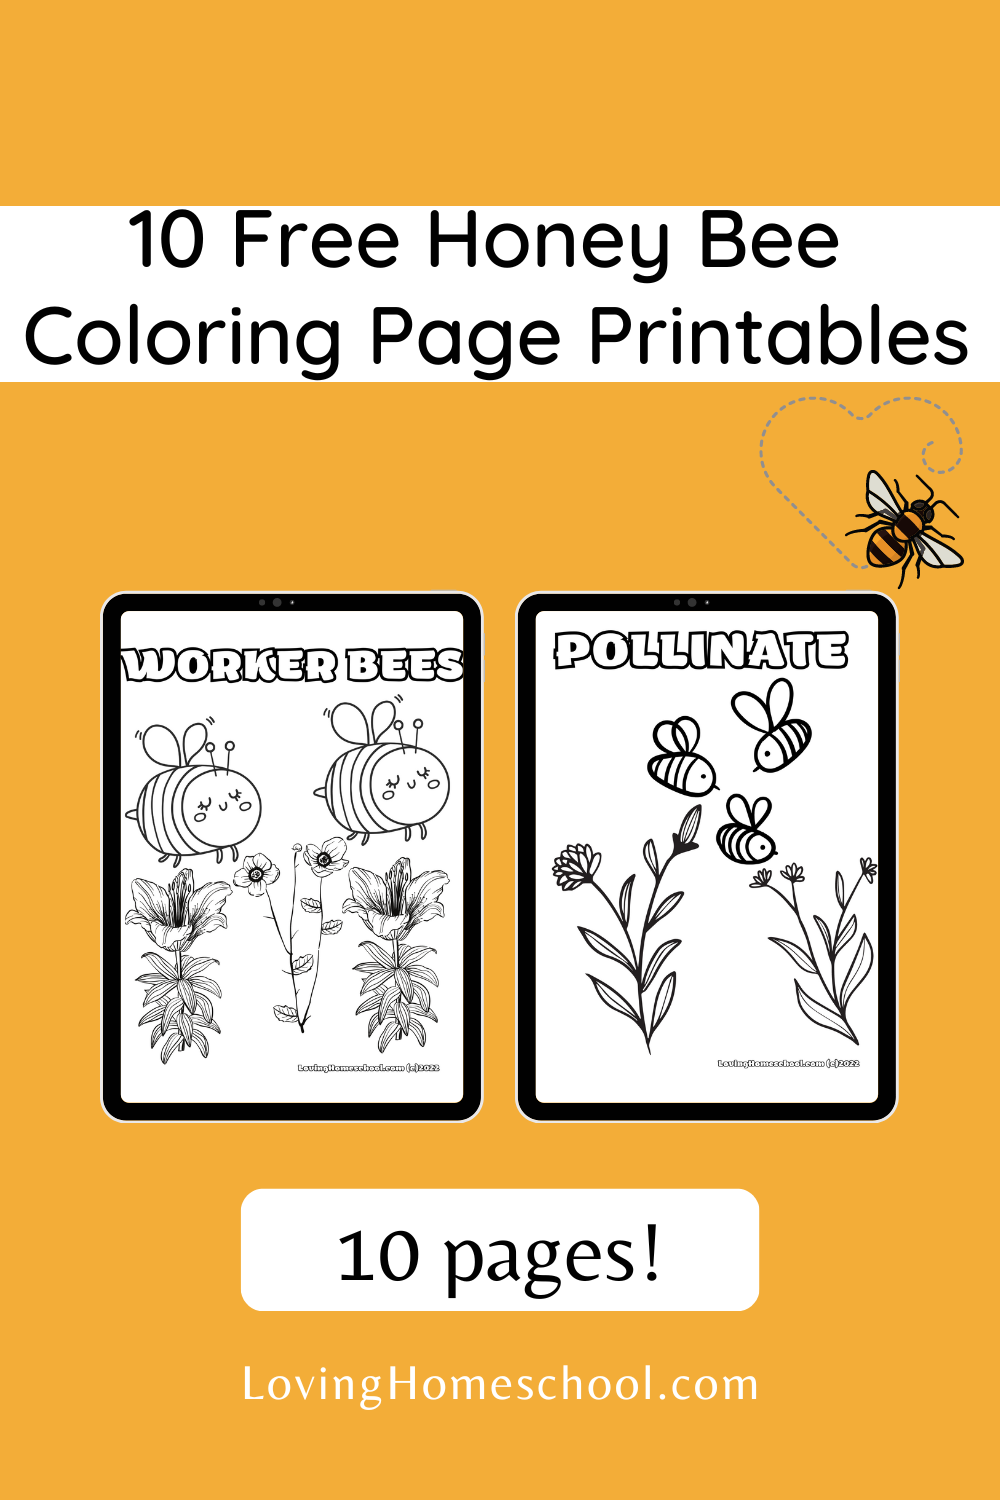 10 Honey Bee Coloring Page Printables Pinterest Pin